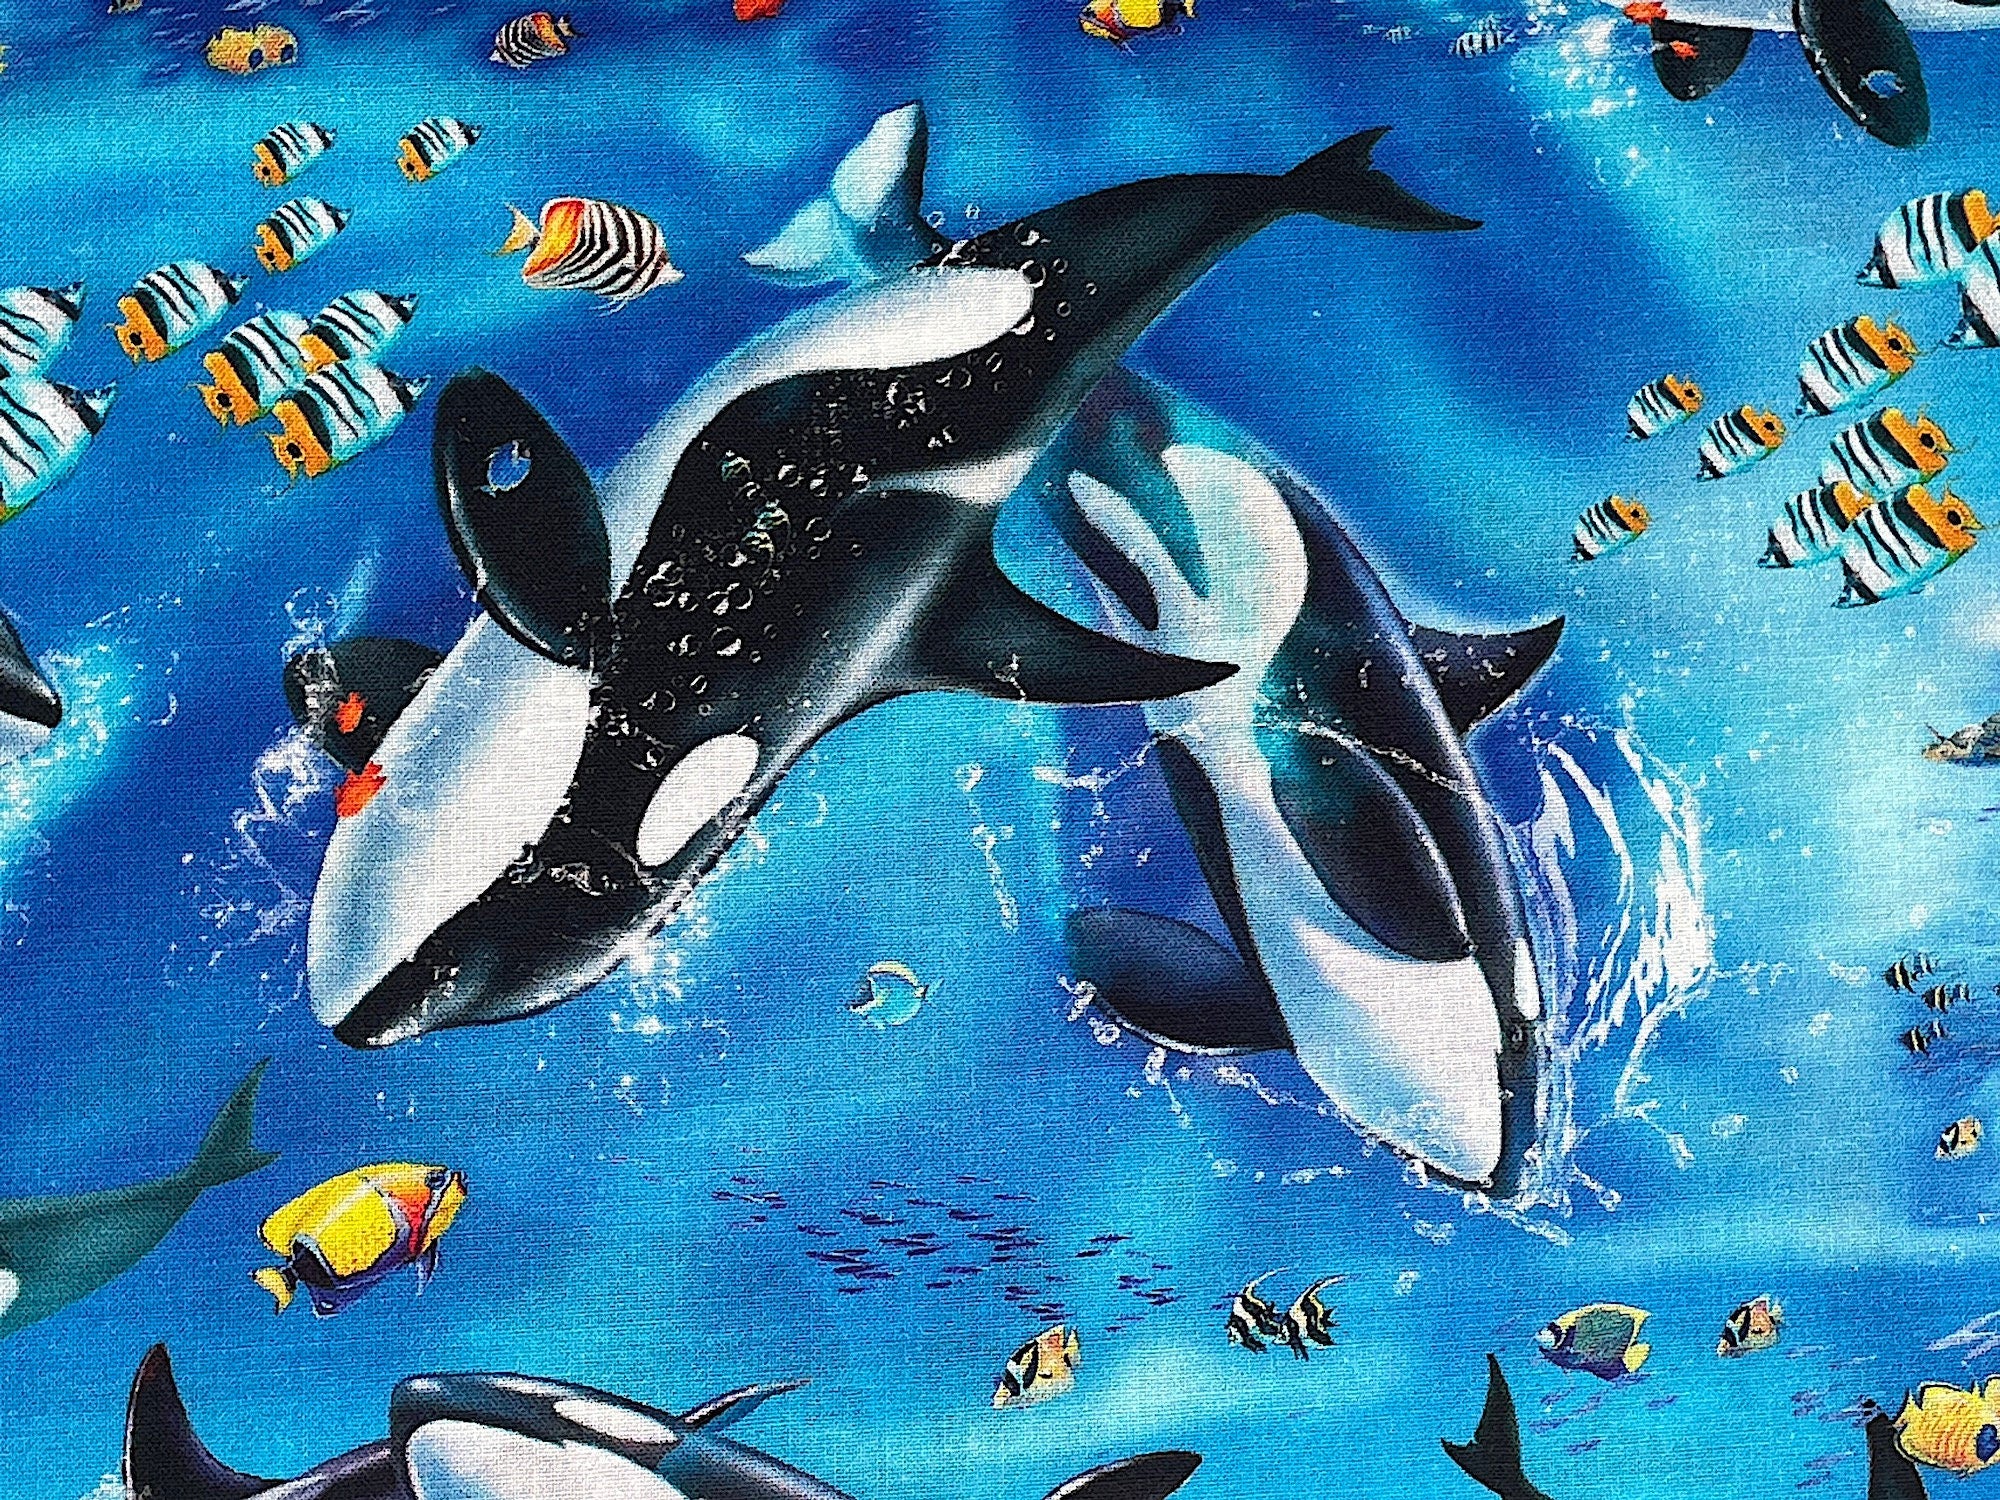 Big Bold Diving Whales. This Fabric is designed by Lorenzo Tempesta for Studio E Fabrics. It is a beautiful sea life representation of Whales and fish in the ocean.